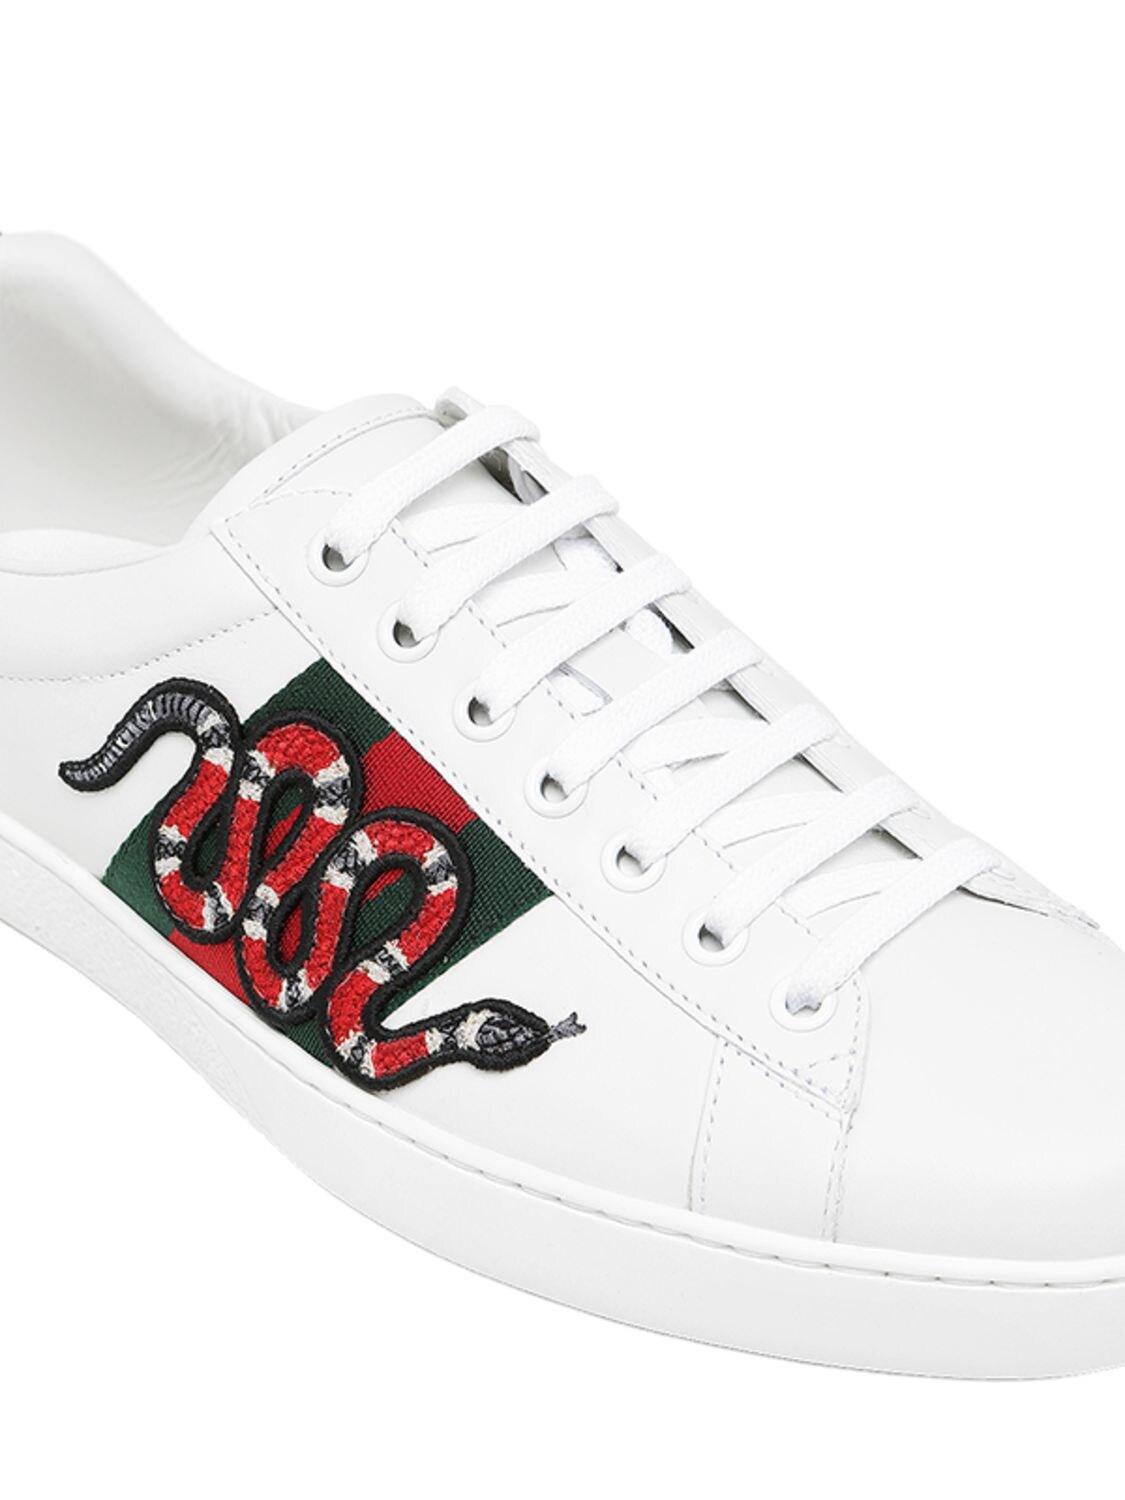 gucci shoes with snakes